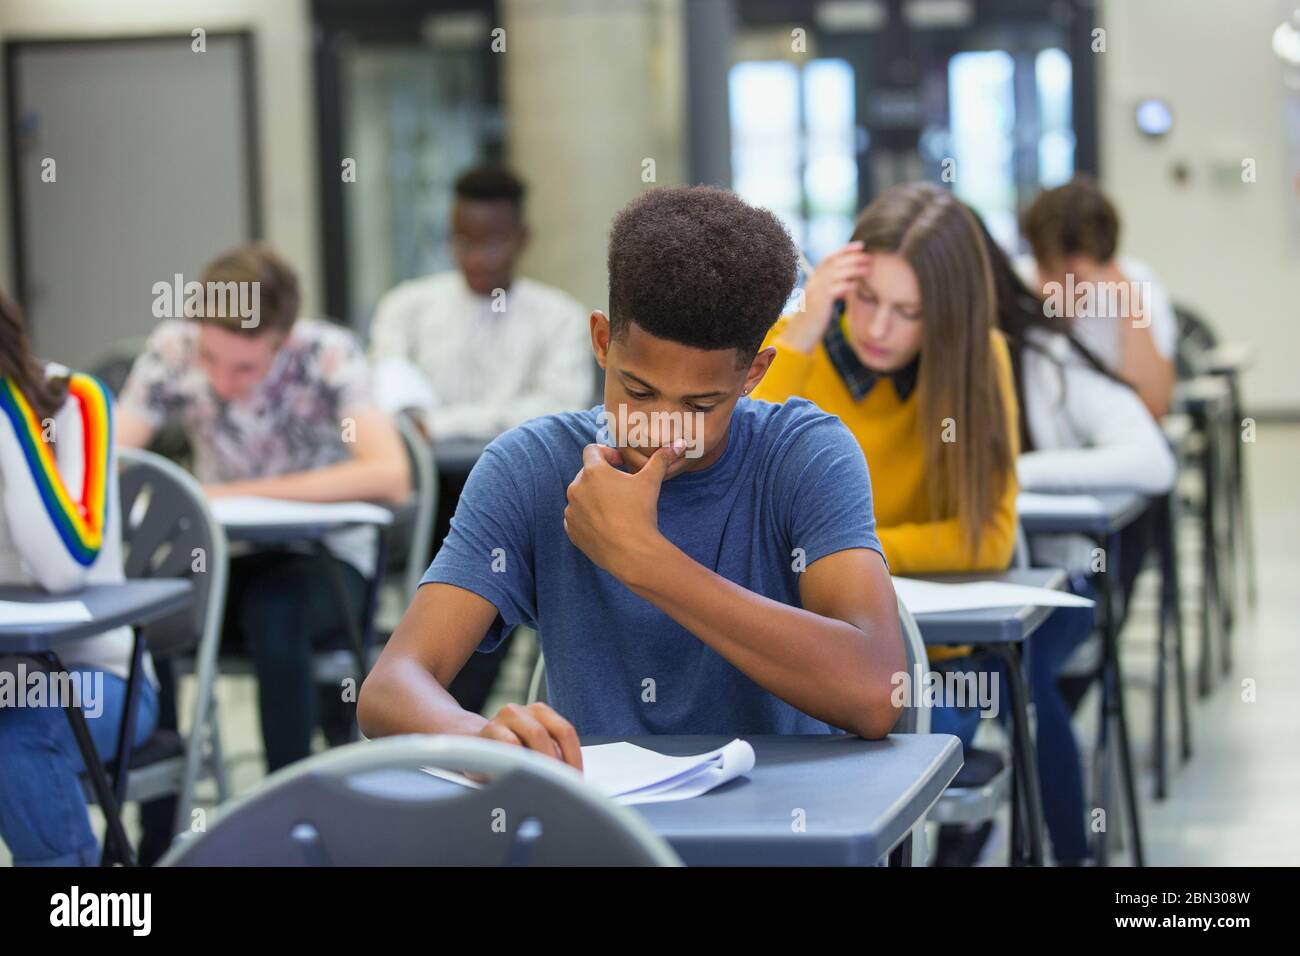 Focused high school boy student taking exam at desk in classroom Stock Photo